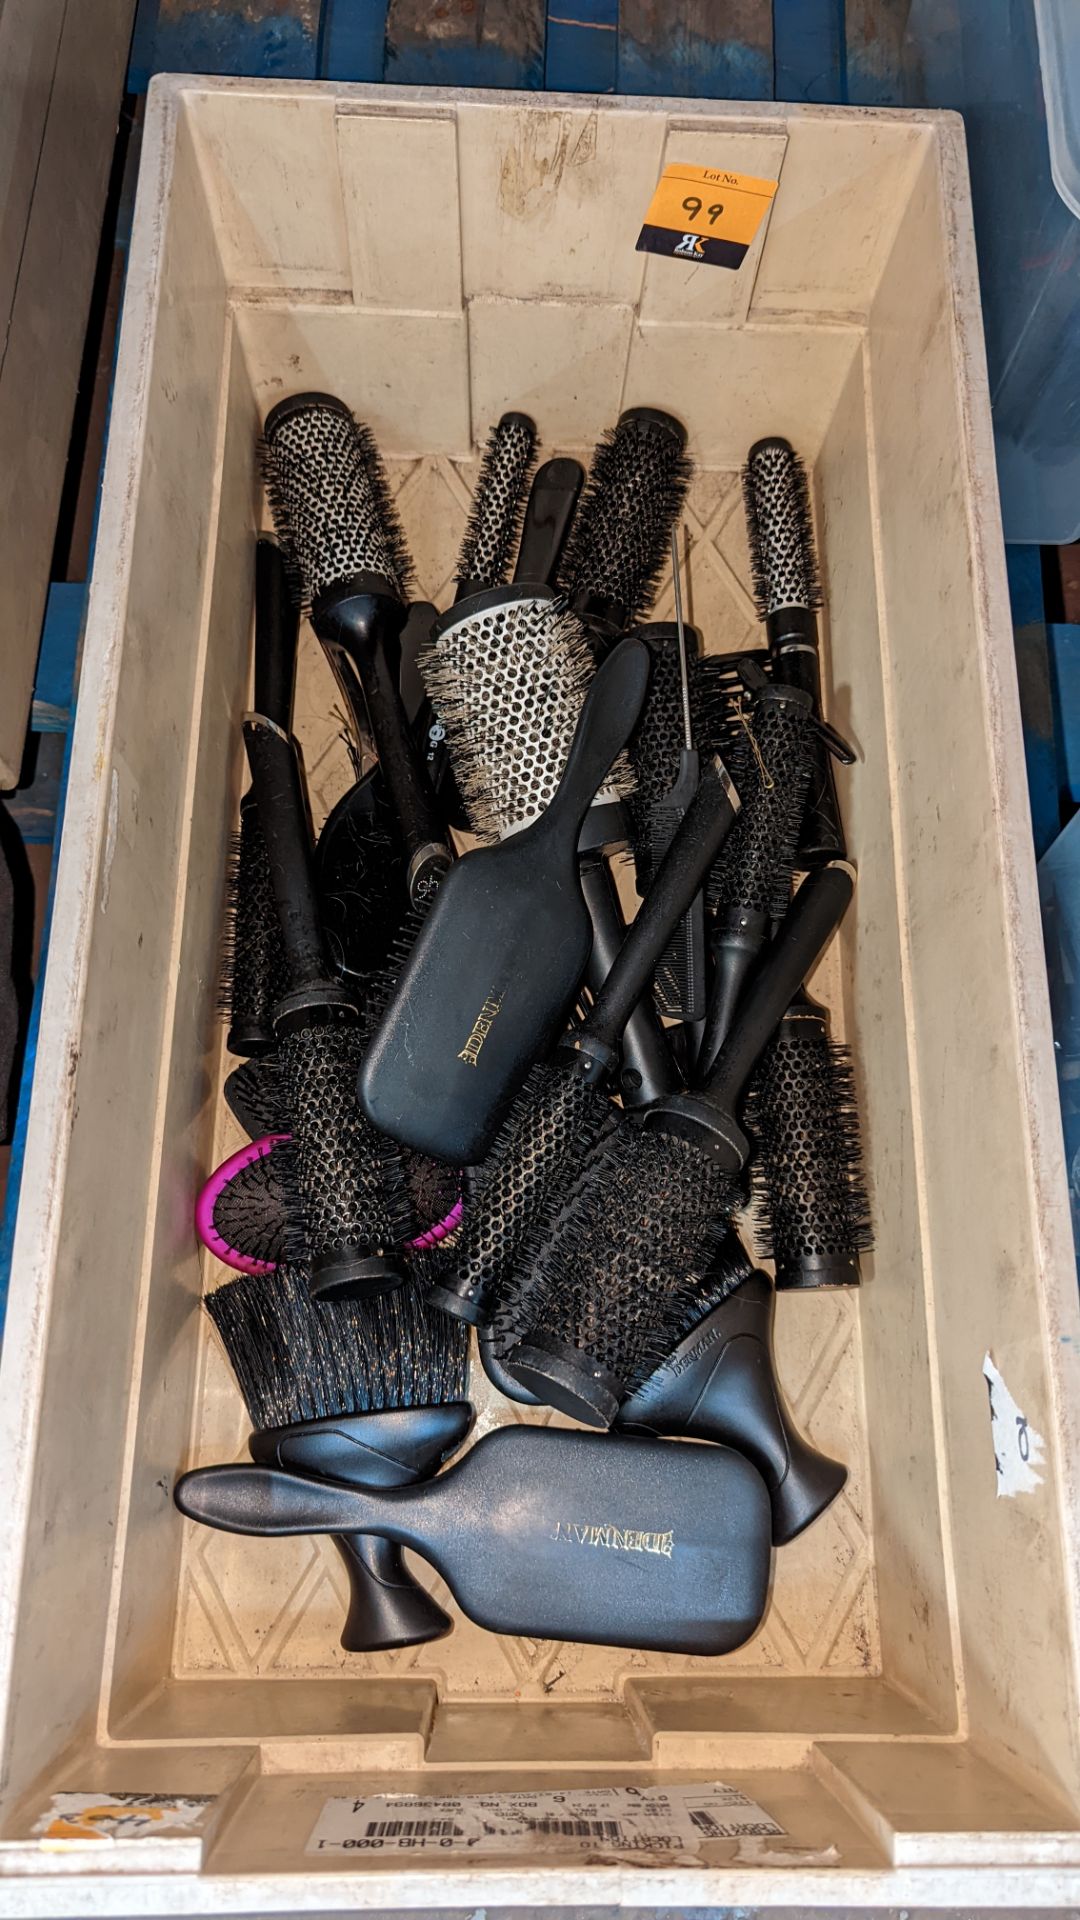 Contents of a crate of hairbrushes & similar - crate excluded - Image 2 of 4